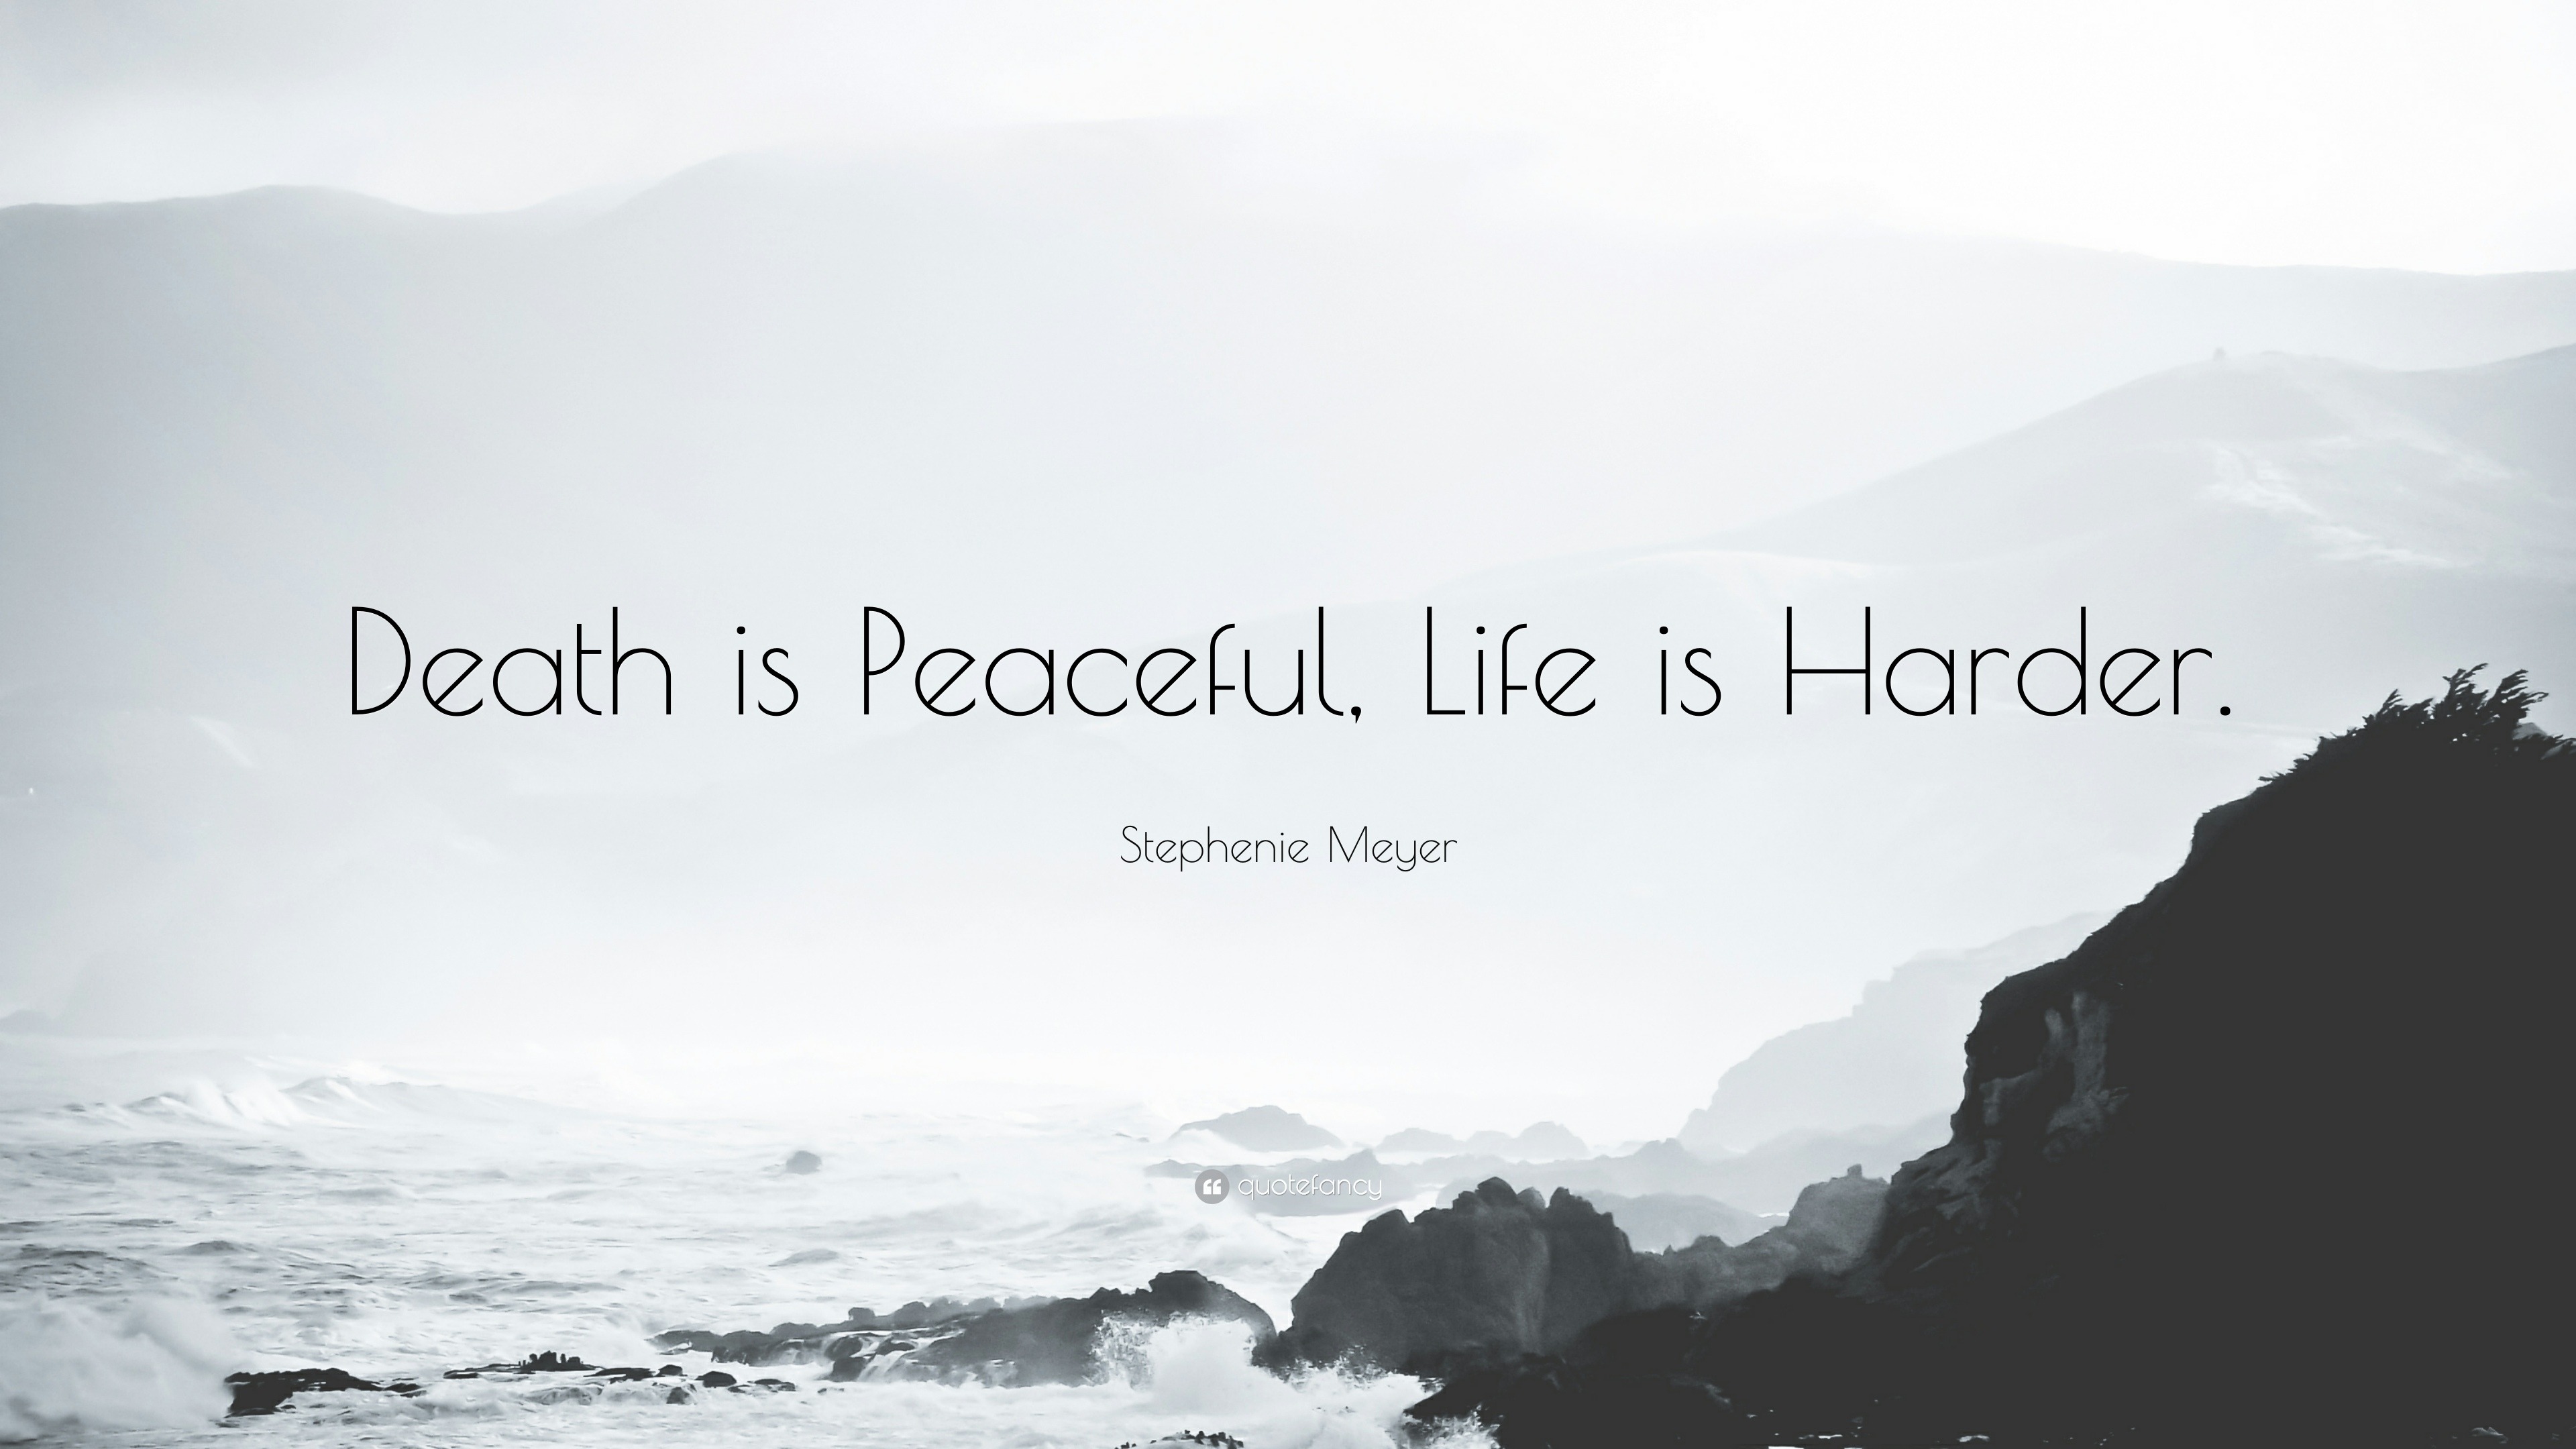 Stephenie Meyer Quote: “Death is Peaceful, Life is Harder.”